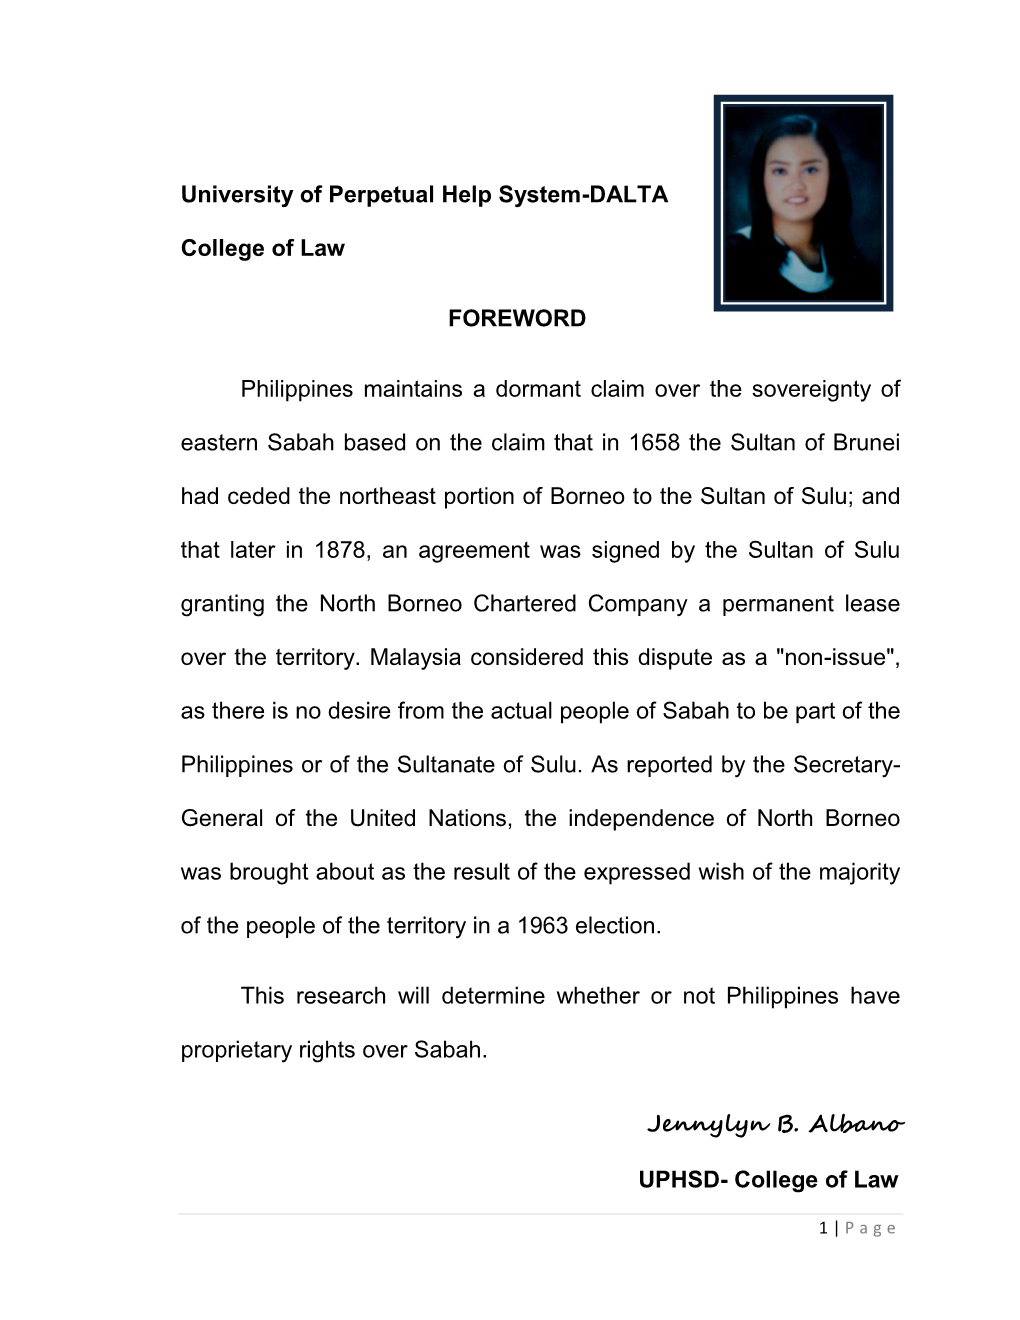 University of Perpetual Help System-DALTA College of Law